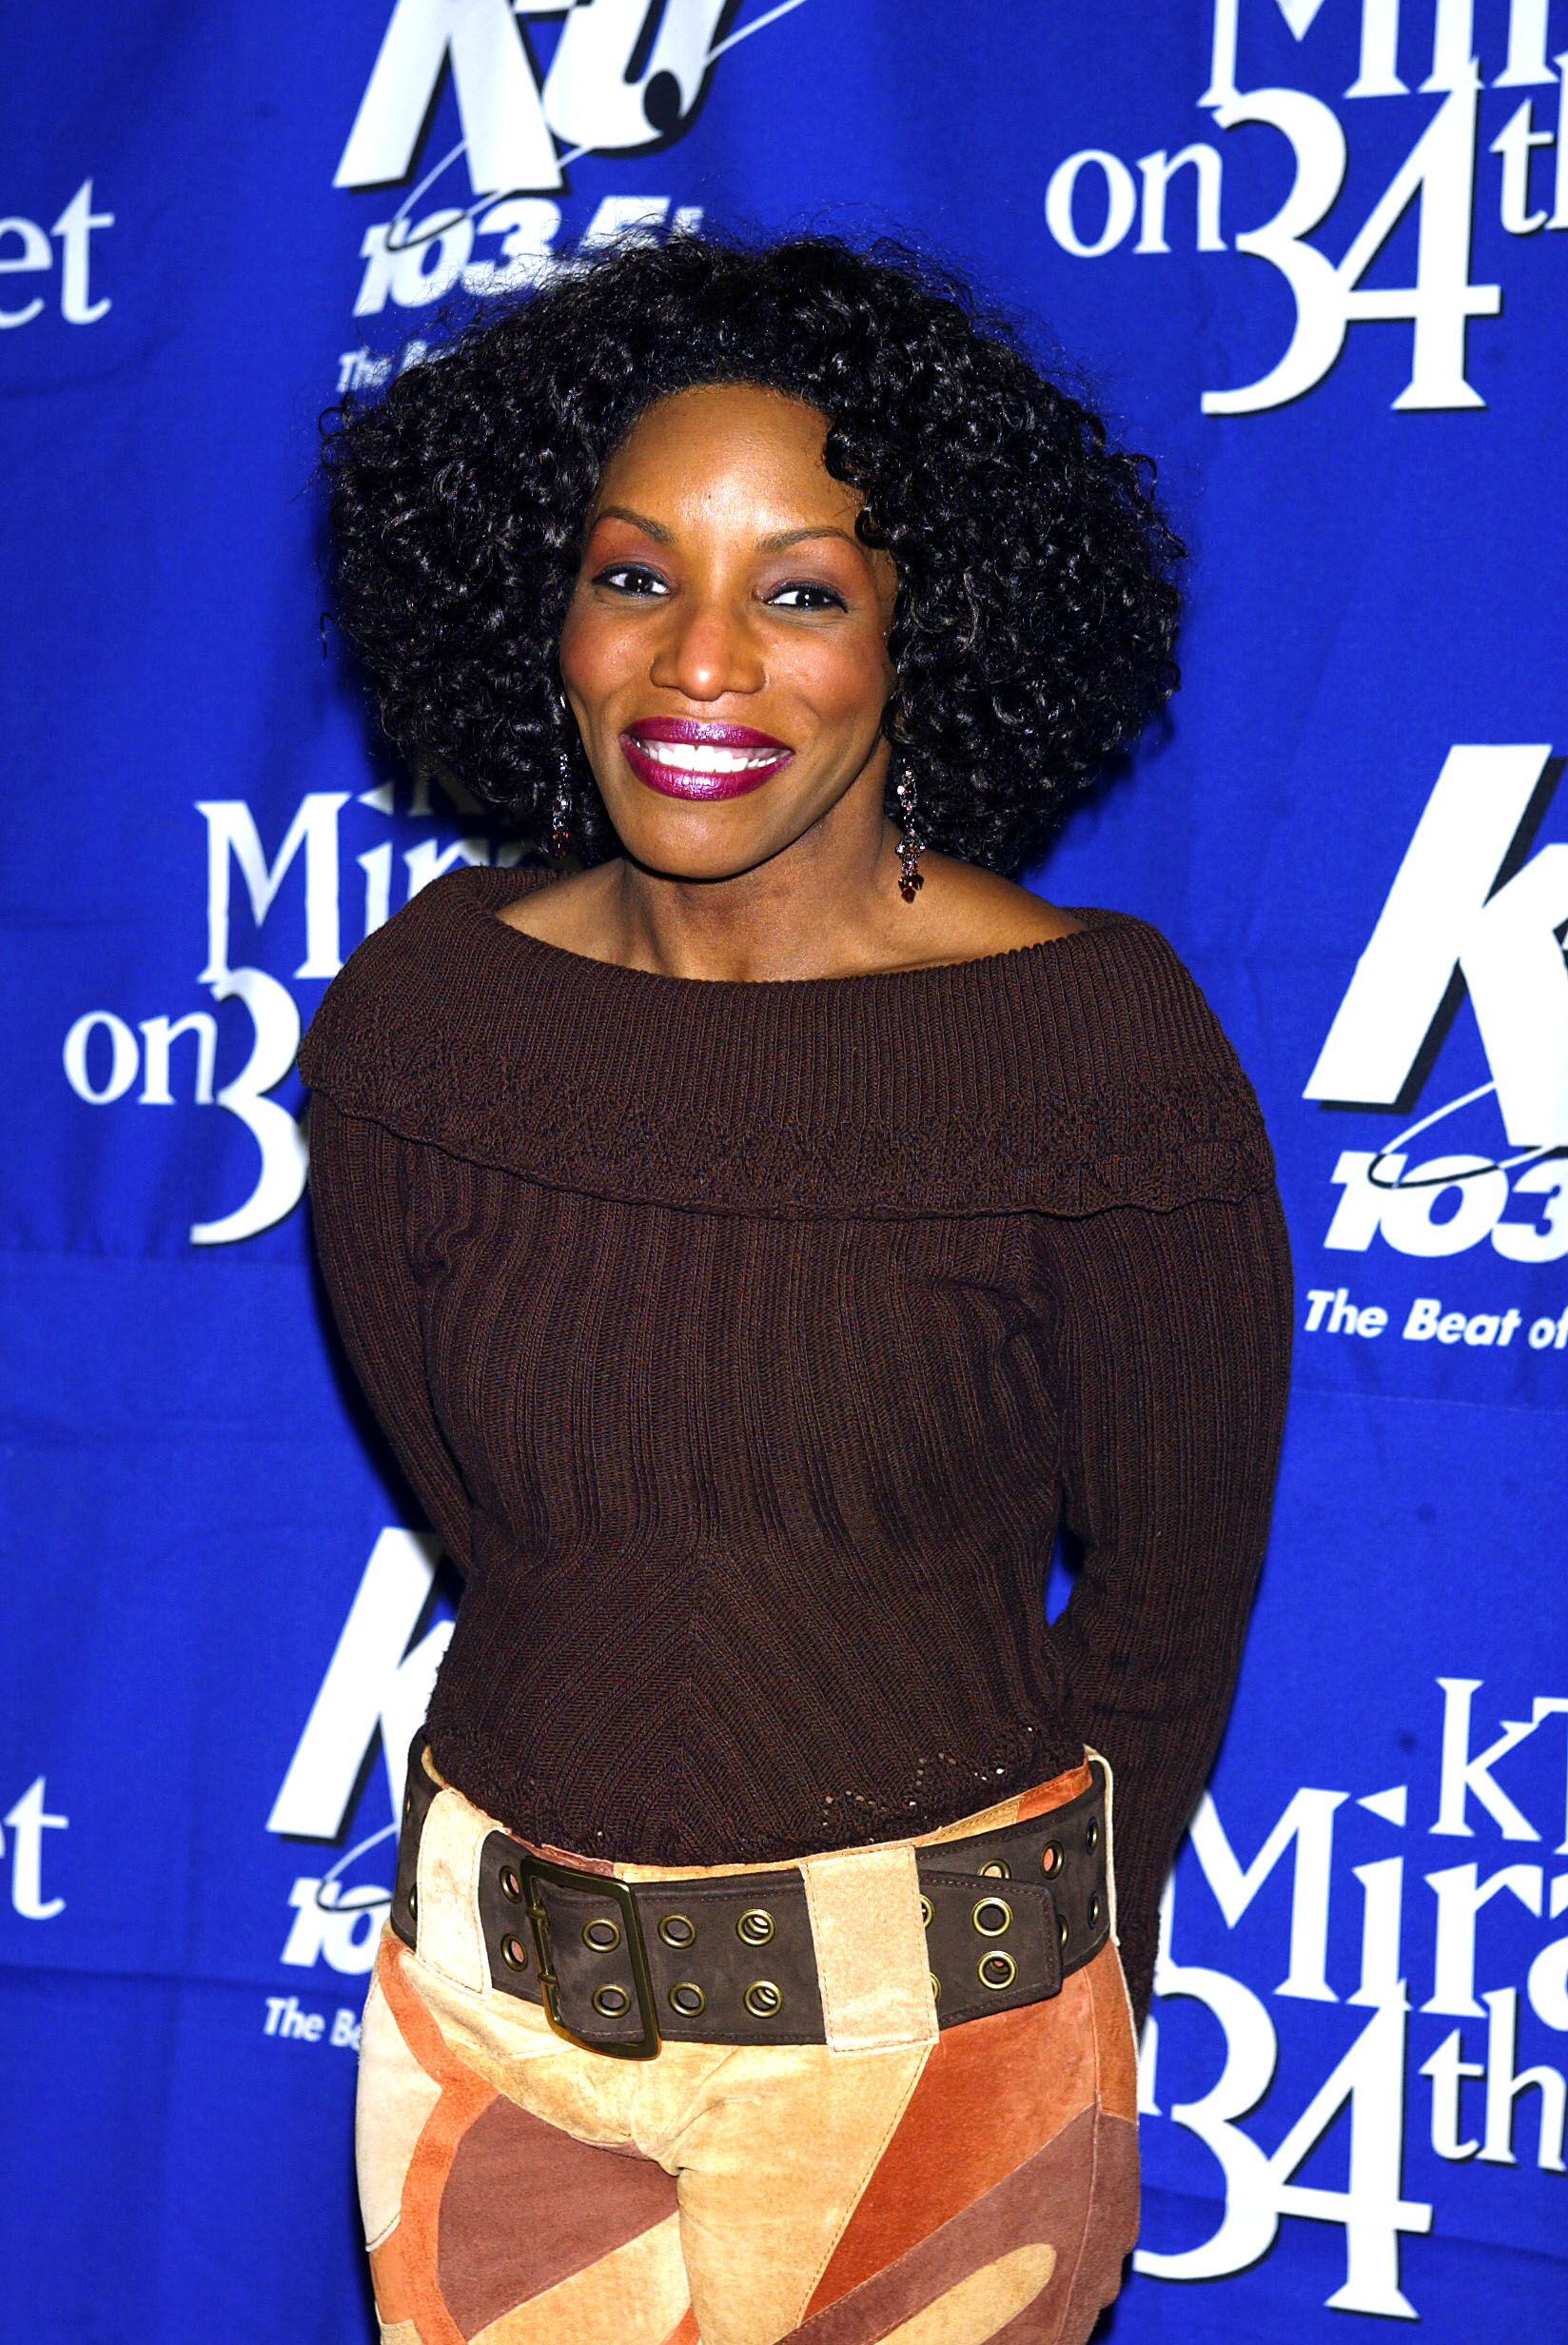 Stephanie Mills backstage during "KTU's Miracle on 34th Street" hoilday concert on December 18, 2002. | Photo: Getty Images